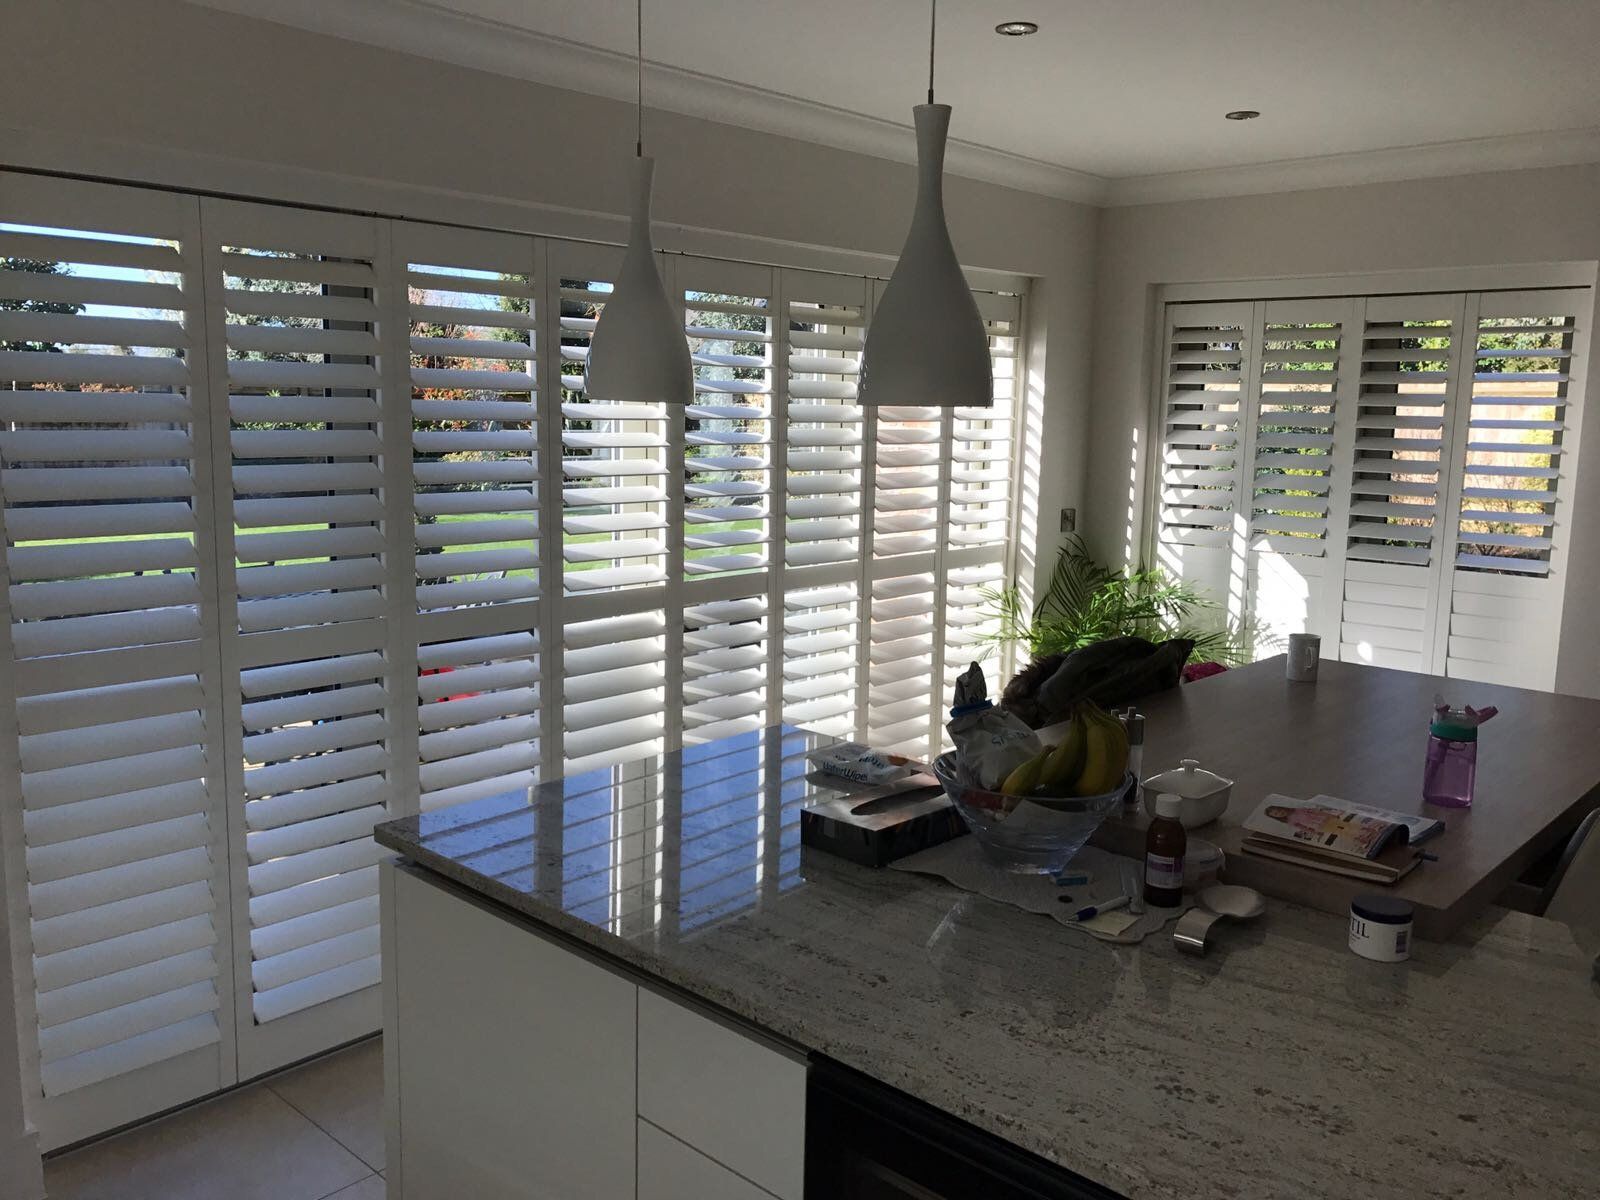 British Made Shutters available to purchase in Walton-on-Thames | Wooden Shutters | Patio Door Shutters |  Made-to-Measure Shutters